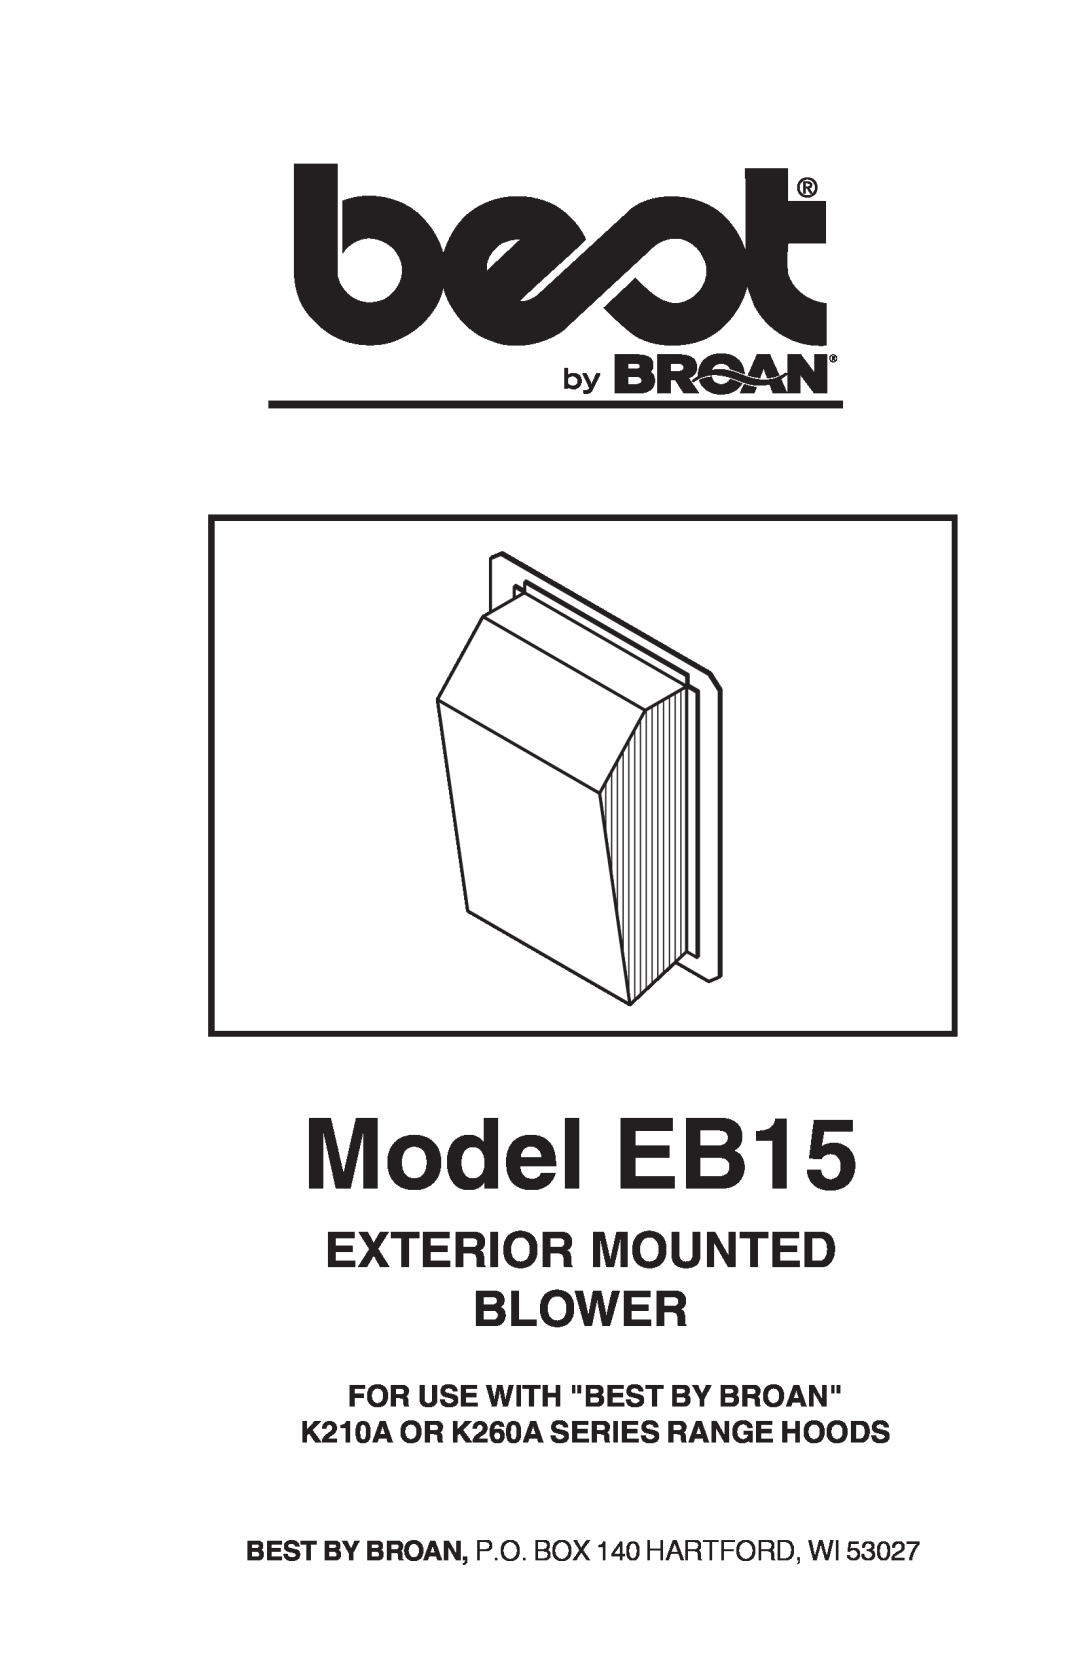 Broan manual Model EB15, Exterior Mounted Blower, FOR USE WITH BEST BY BROAN K210A OR K260A SERIES RANGE HOODS 